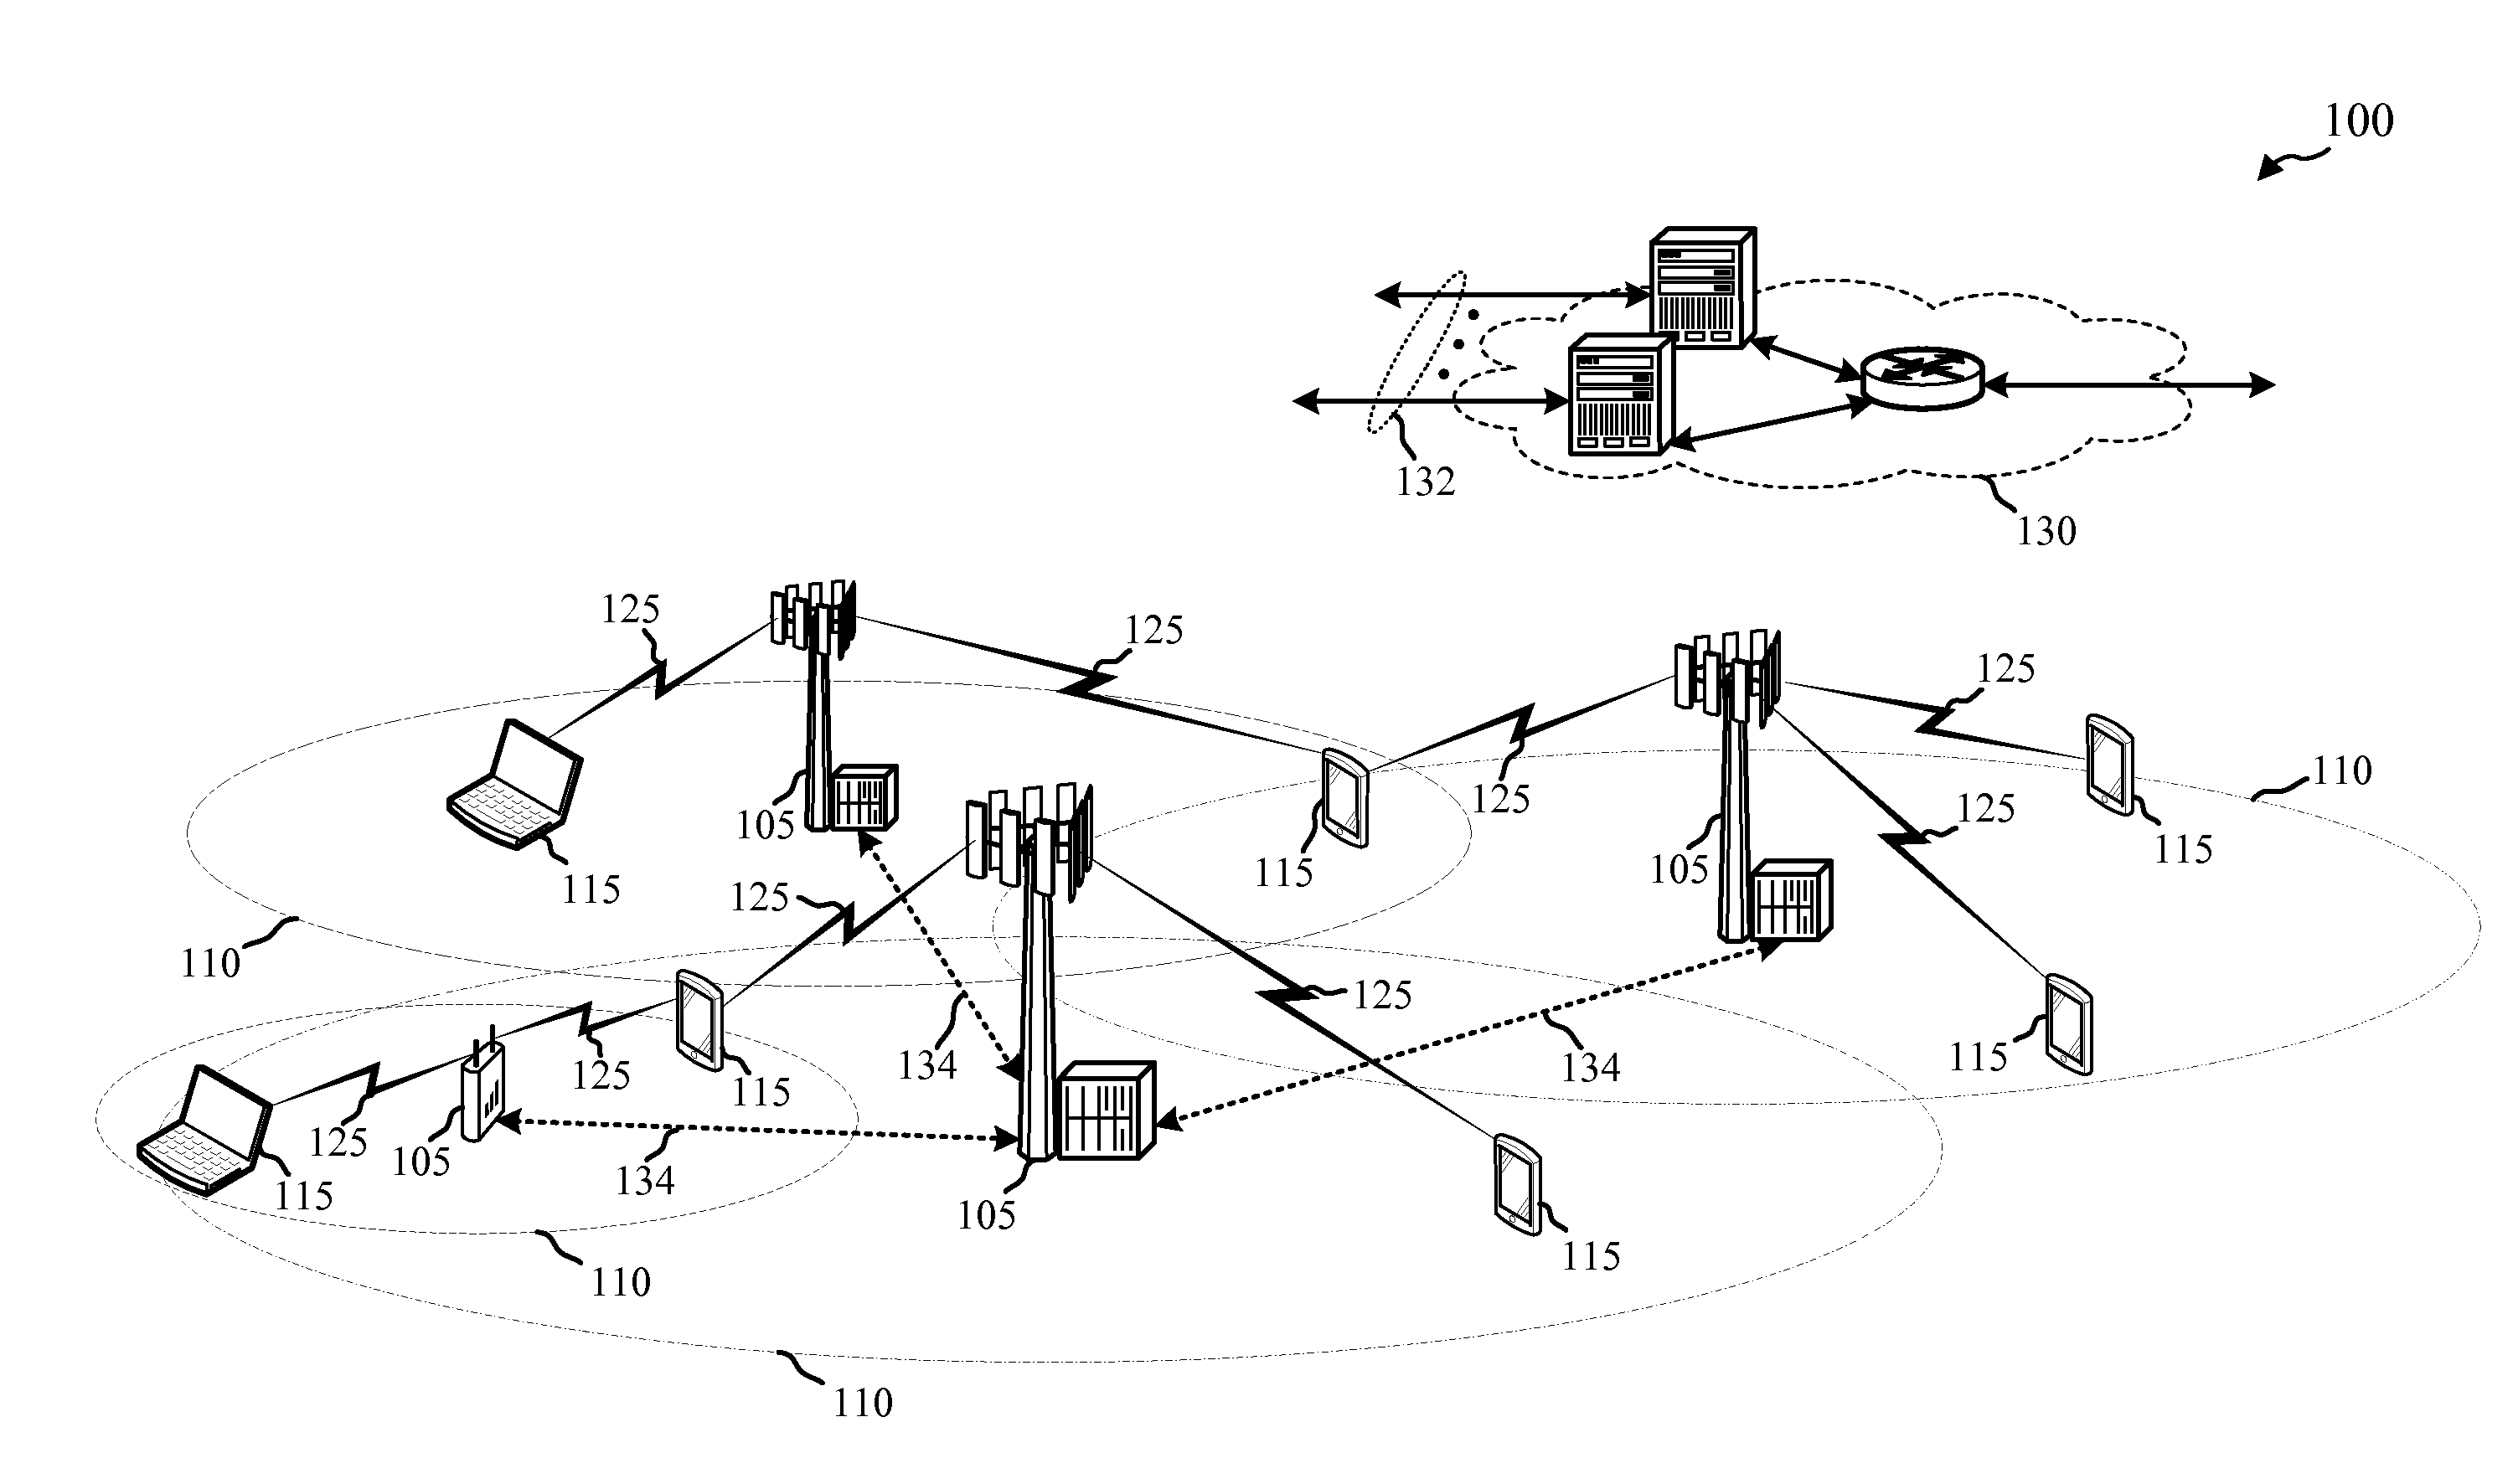 Channel feedback for non-orthogonal multiple access systems